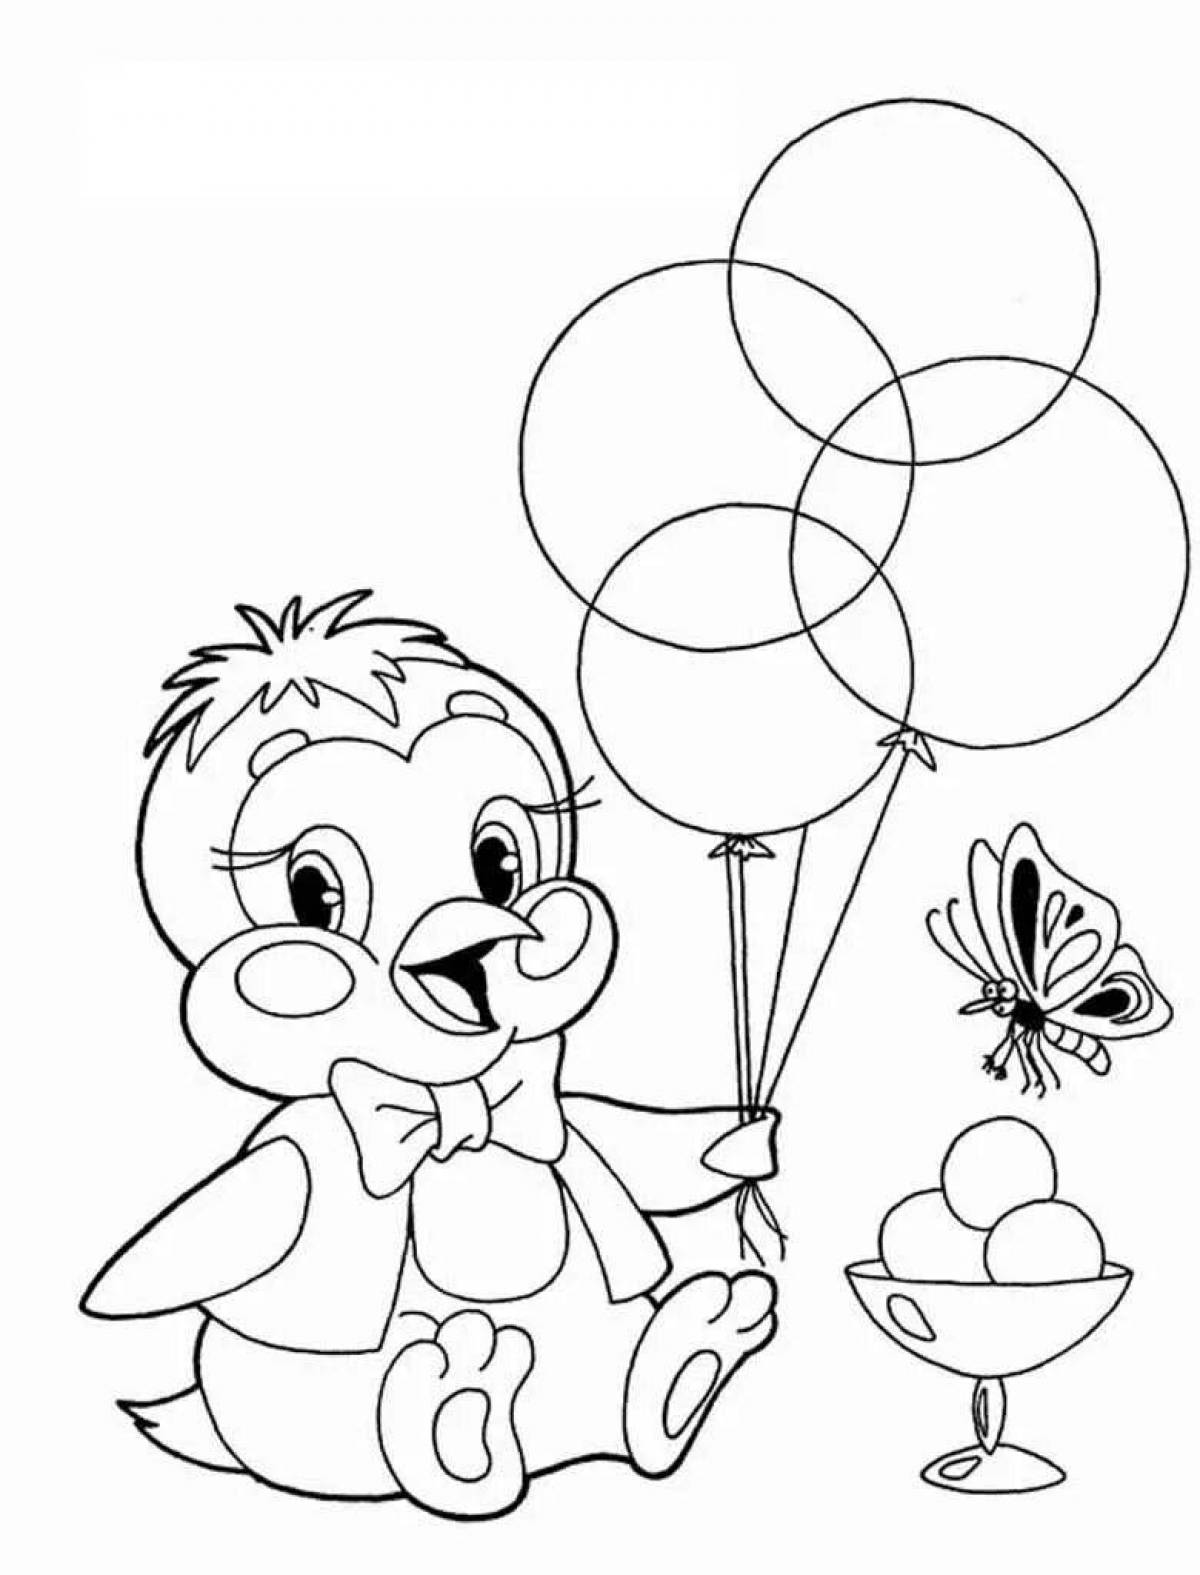 Coloring book with colorful balloons for children 4-5 years old